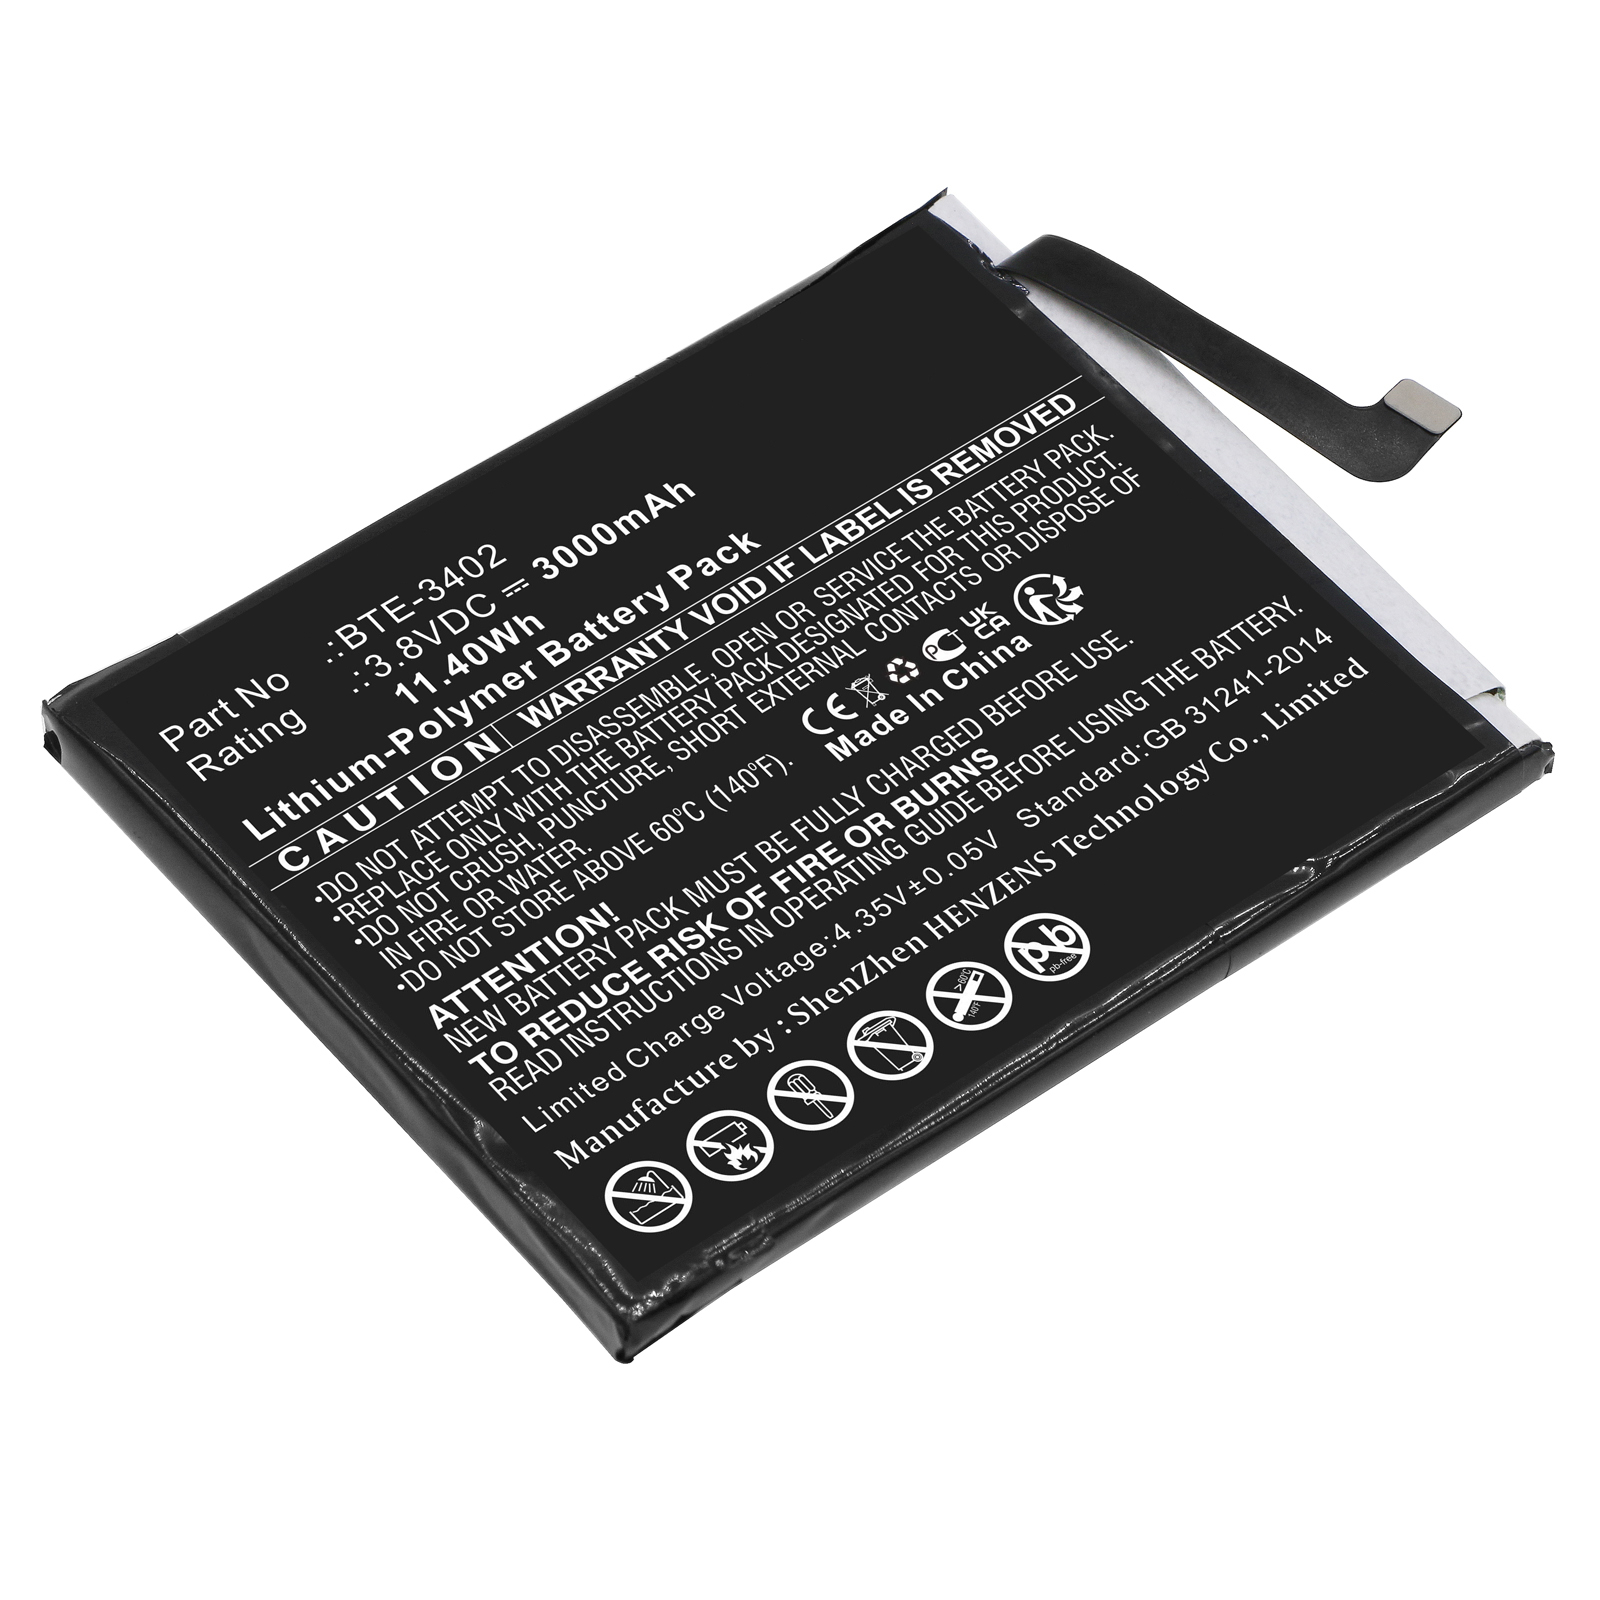 Synergy Digital Cell Phone Battery, Compatible with Orbic BTE-3402 Cell Phone Battery (Li-Pol, 3.8V, 3000mAh)